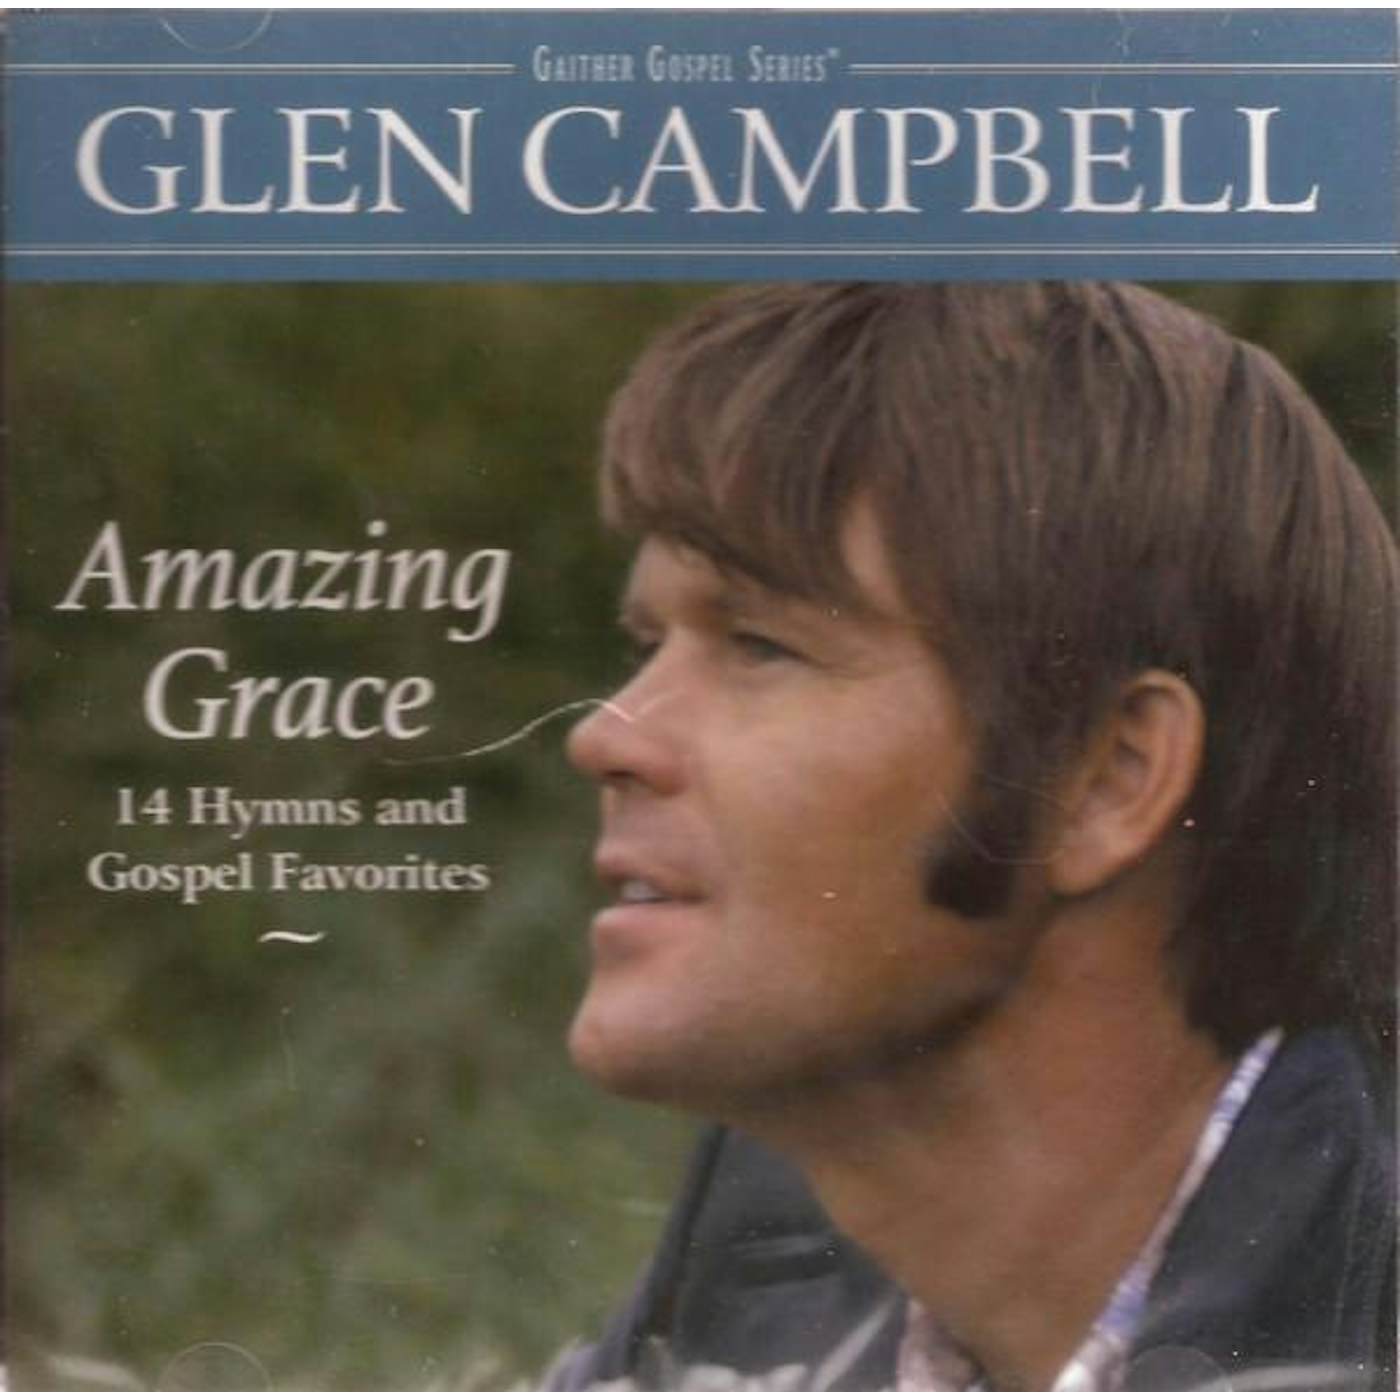 Glen Campbell AMAZING GRACE: 14 HYMNS AND GOSPEL FAVORITES CD